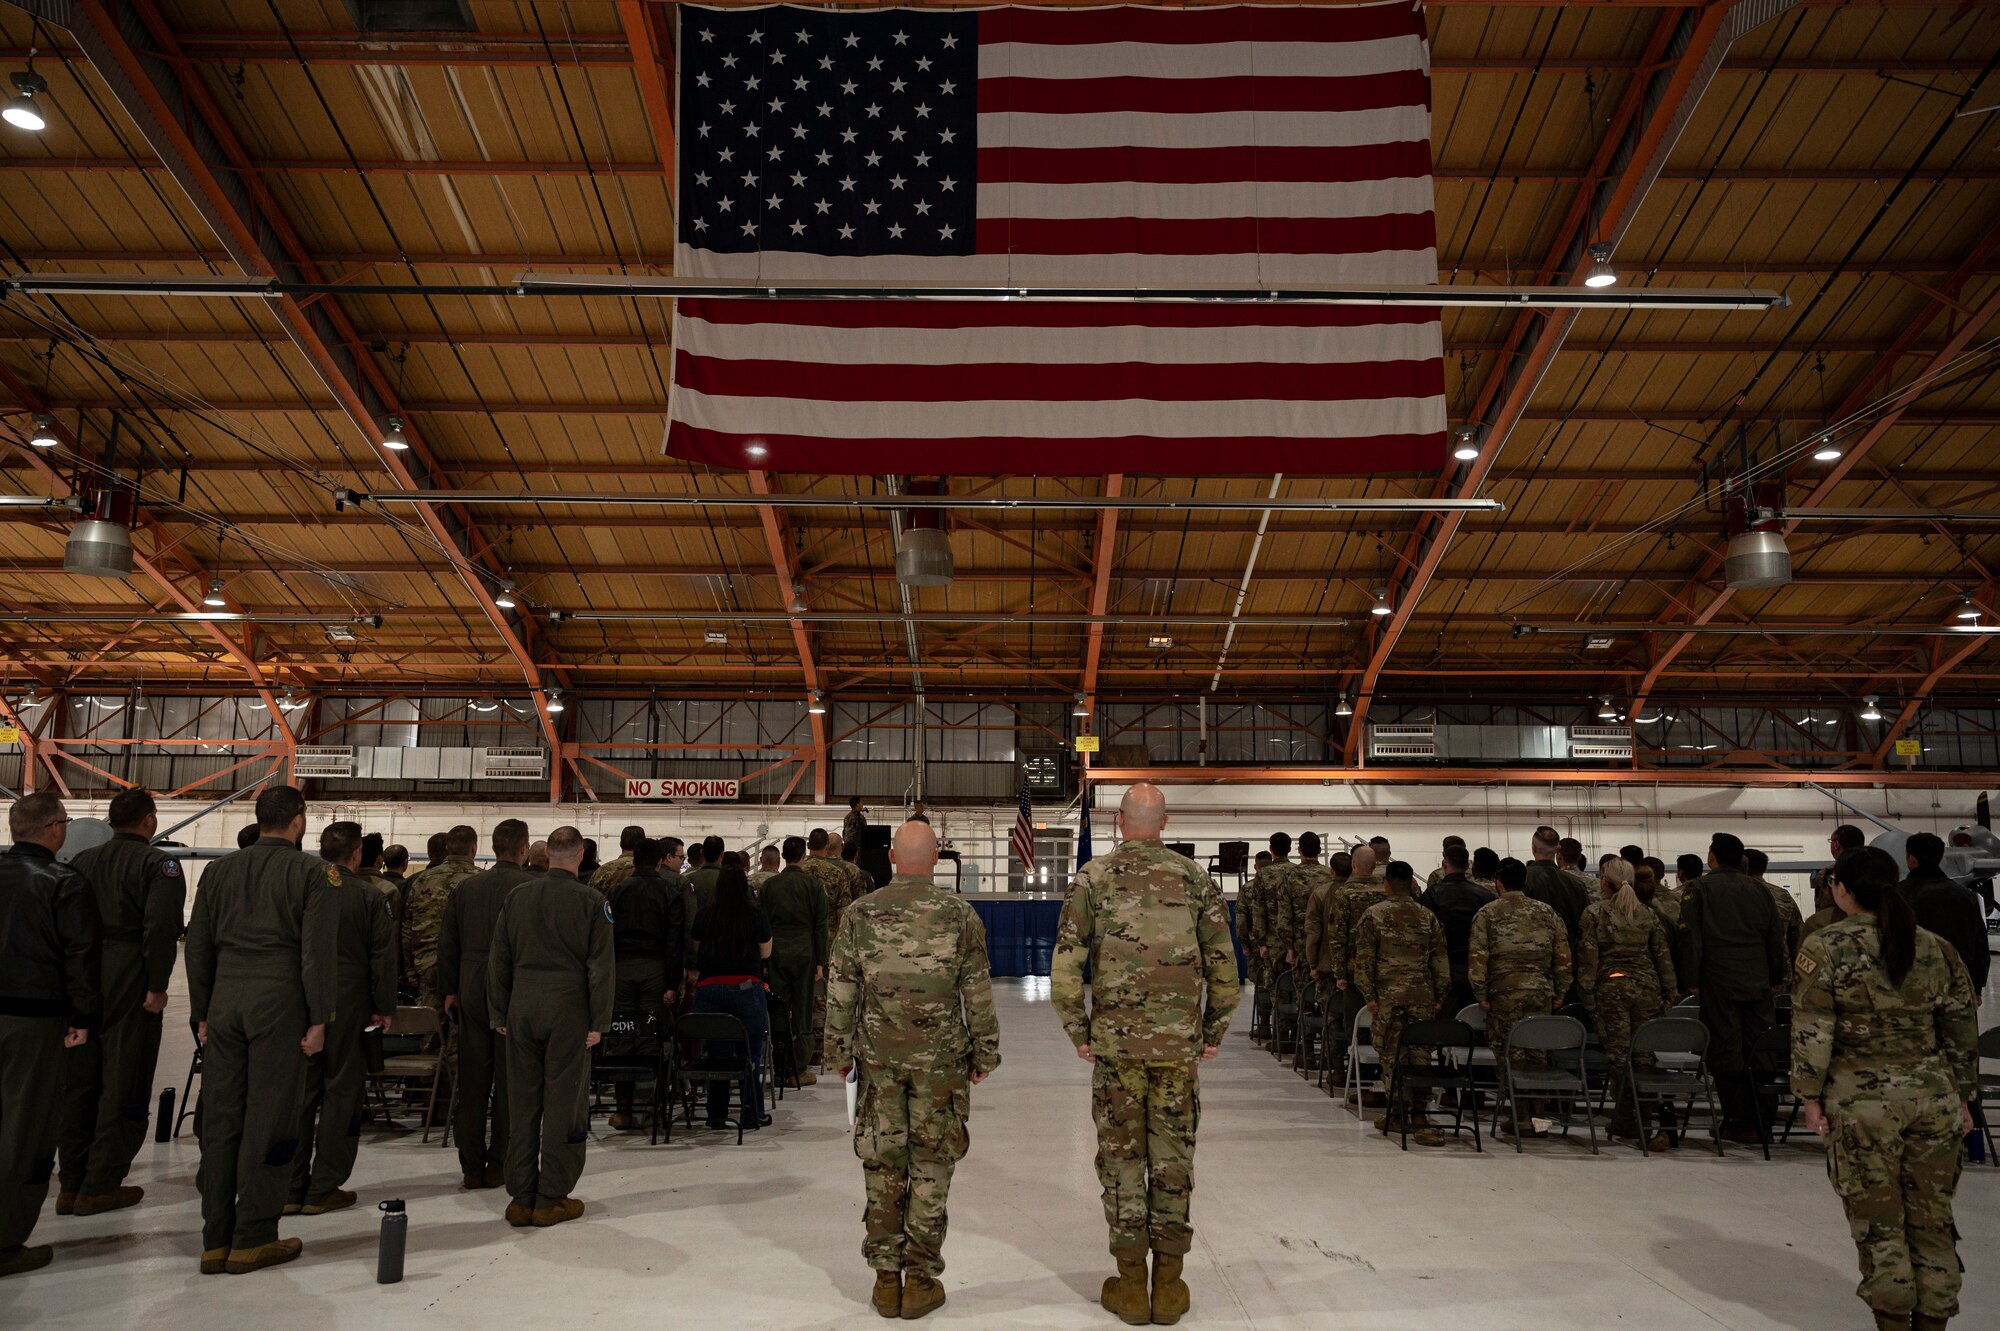 Airmen from the 49th Aircraft Maintenance Squadron stand for the pledge of allegiance during the 2022 Dedicated Crew Chief Appointment Ceremony at Holloman Air Force Base, New Mexico, Nov. 18, 2022. To become a DDC, a crew chief must have proficient technical knowledge of the MQ-9 Reaper to contribute to building combat-capable aircraft. (U.S. Air Force photo by Airman 1st Class Isaiah Pedrazzini)